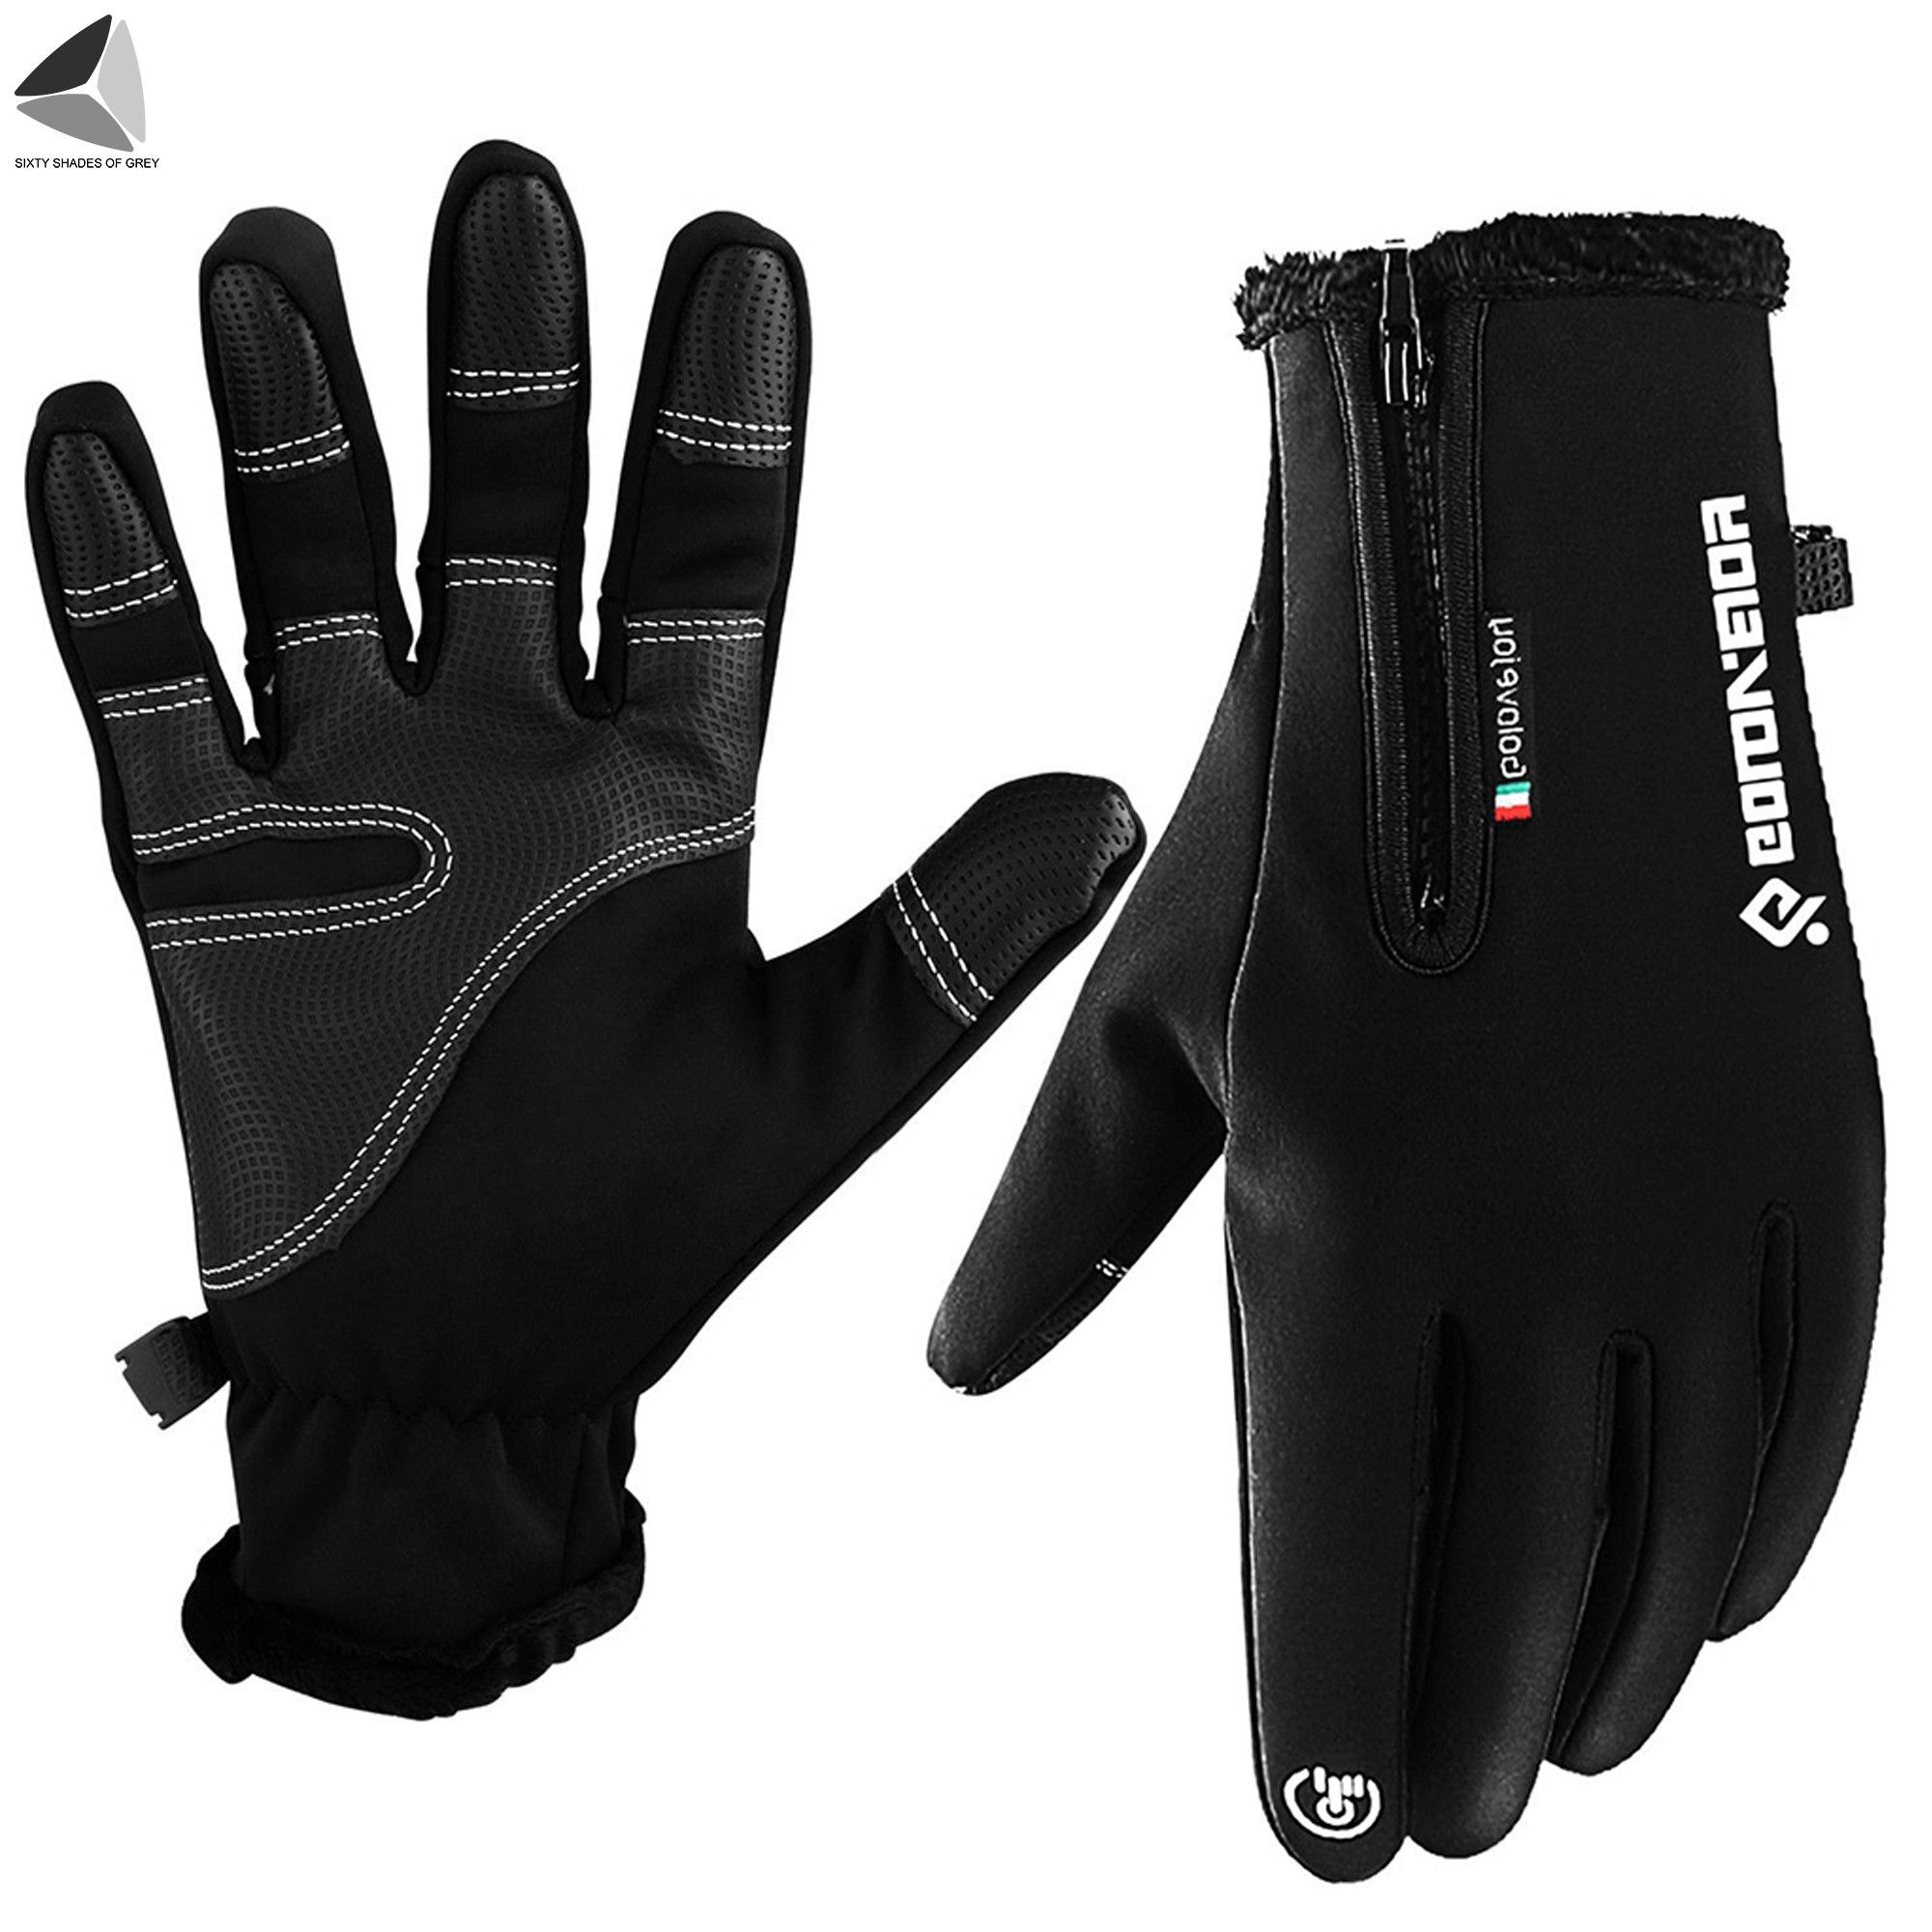 PULLIMORE 2 Pairs Winter Warm Gloves for Men Women Waterproof Touchscreen Gloves Non-Slip Mittens for Skiing Driving Cycling Running (2XL, Black) - image 3 of 9